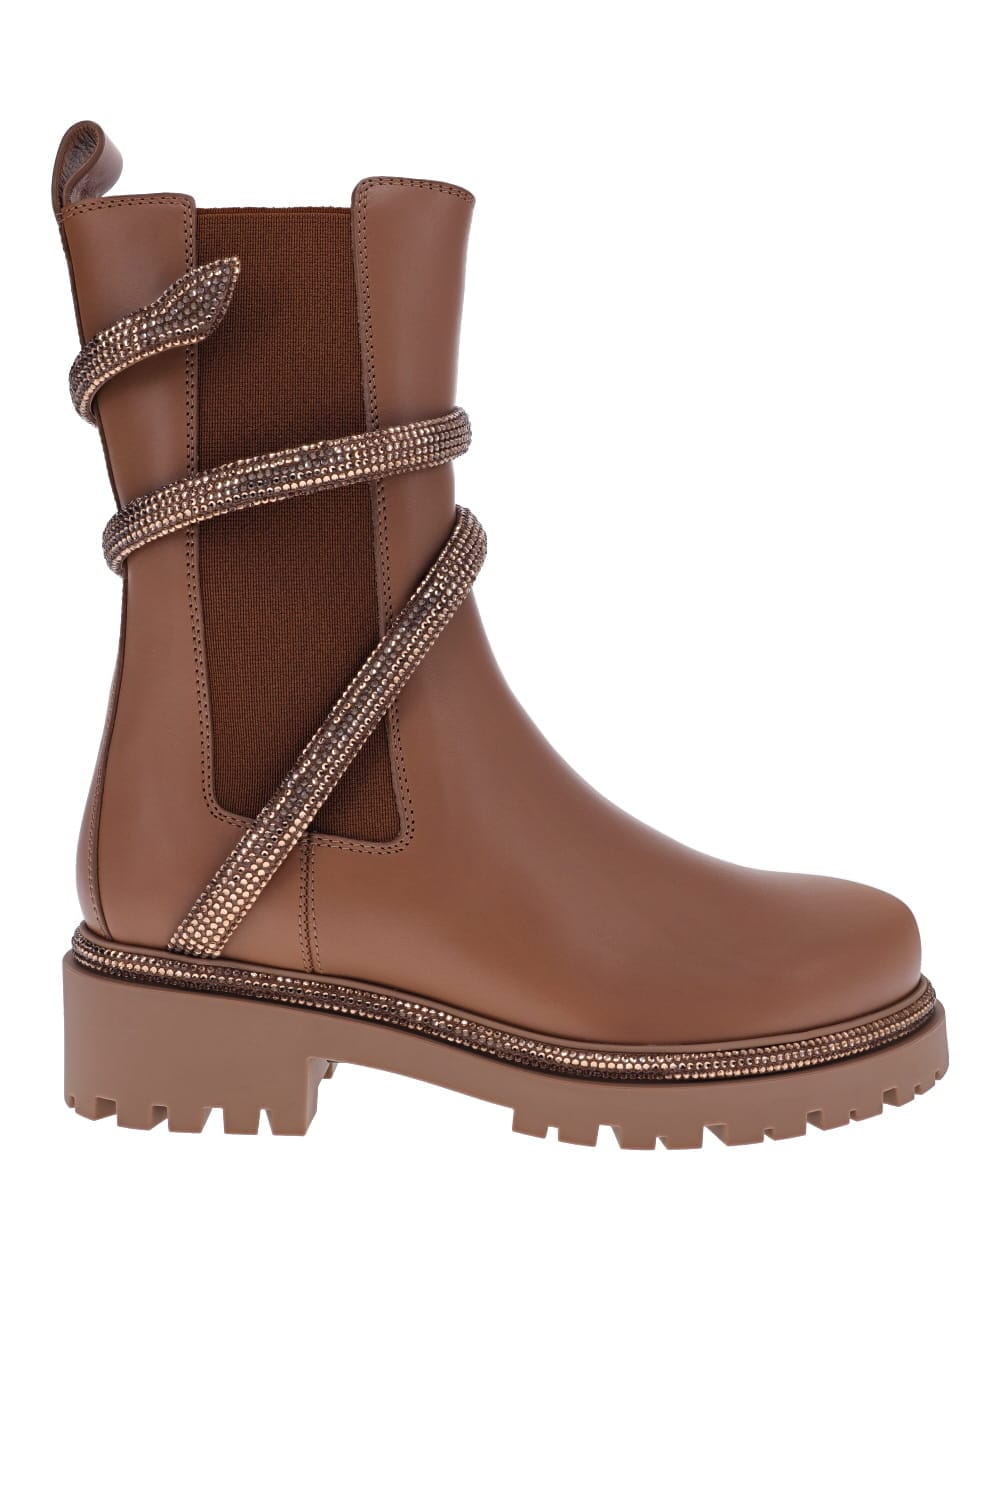 RENE CAOVILLA Crystal Ankle Wrap Brown Leather Biker Boots